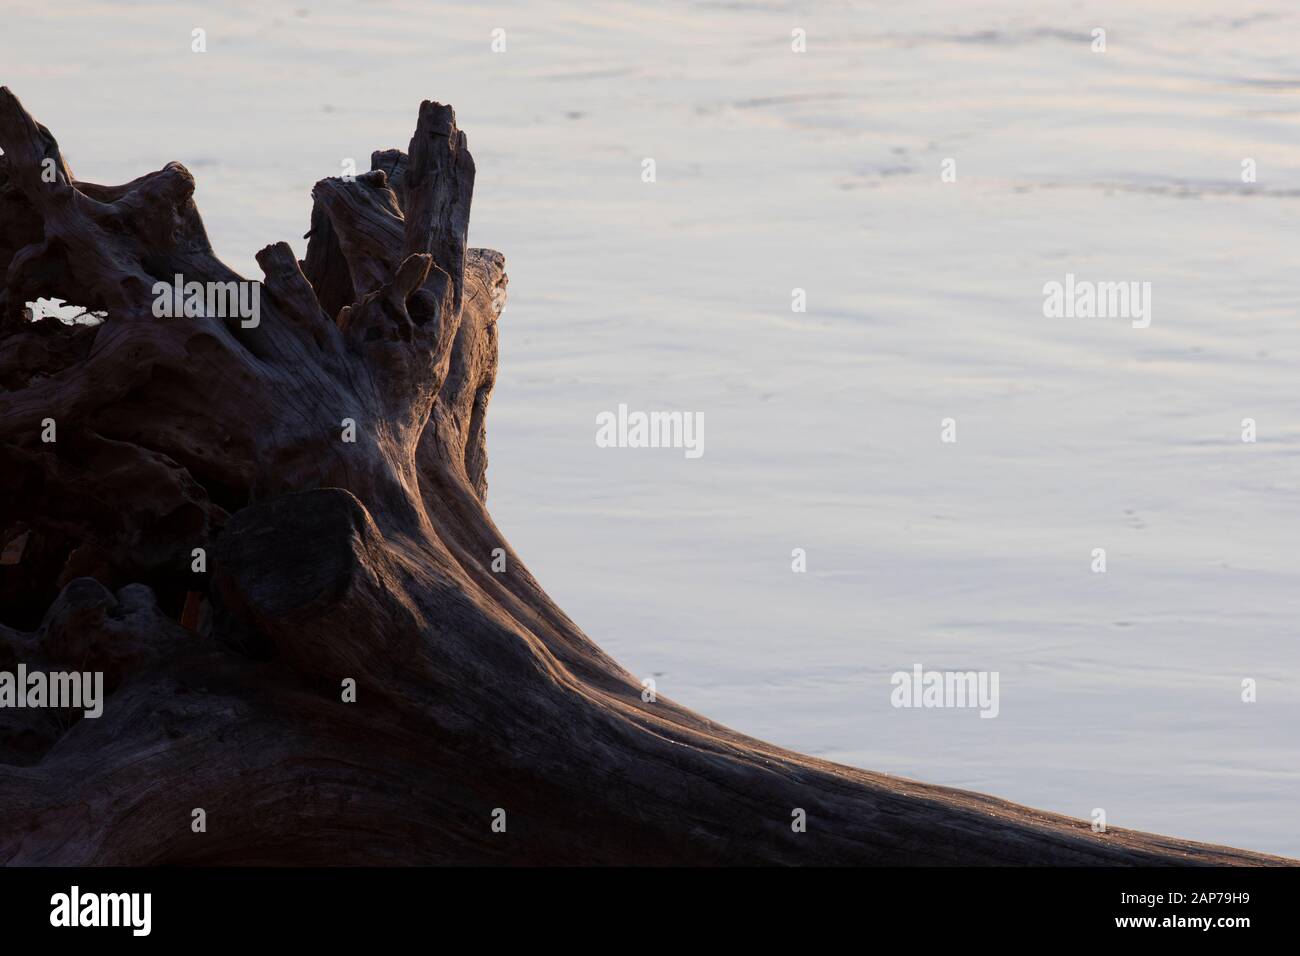 A log on the side of the Clark Fork river at sunrise Stock Photo